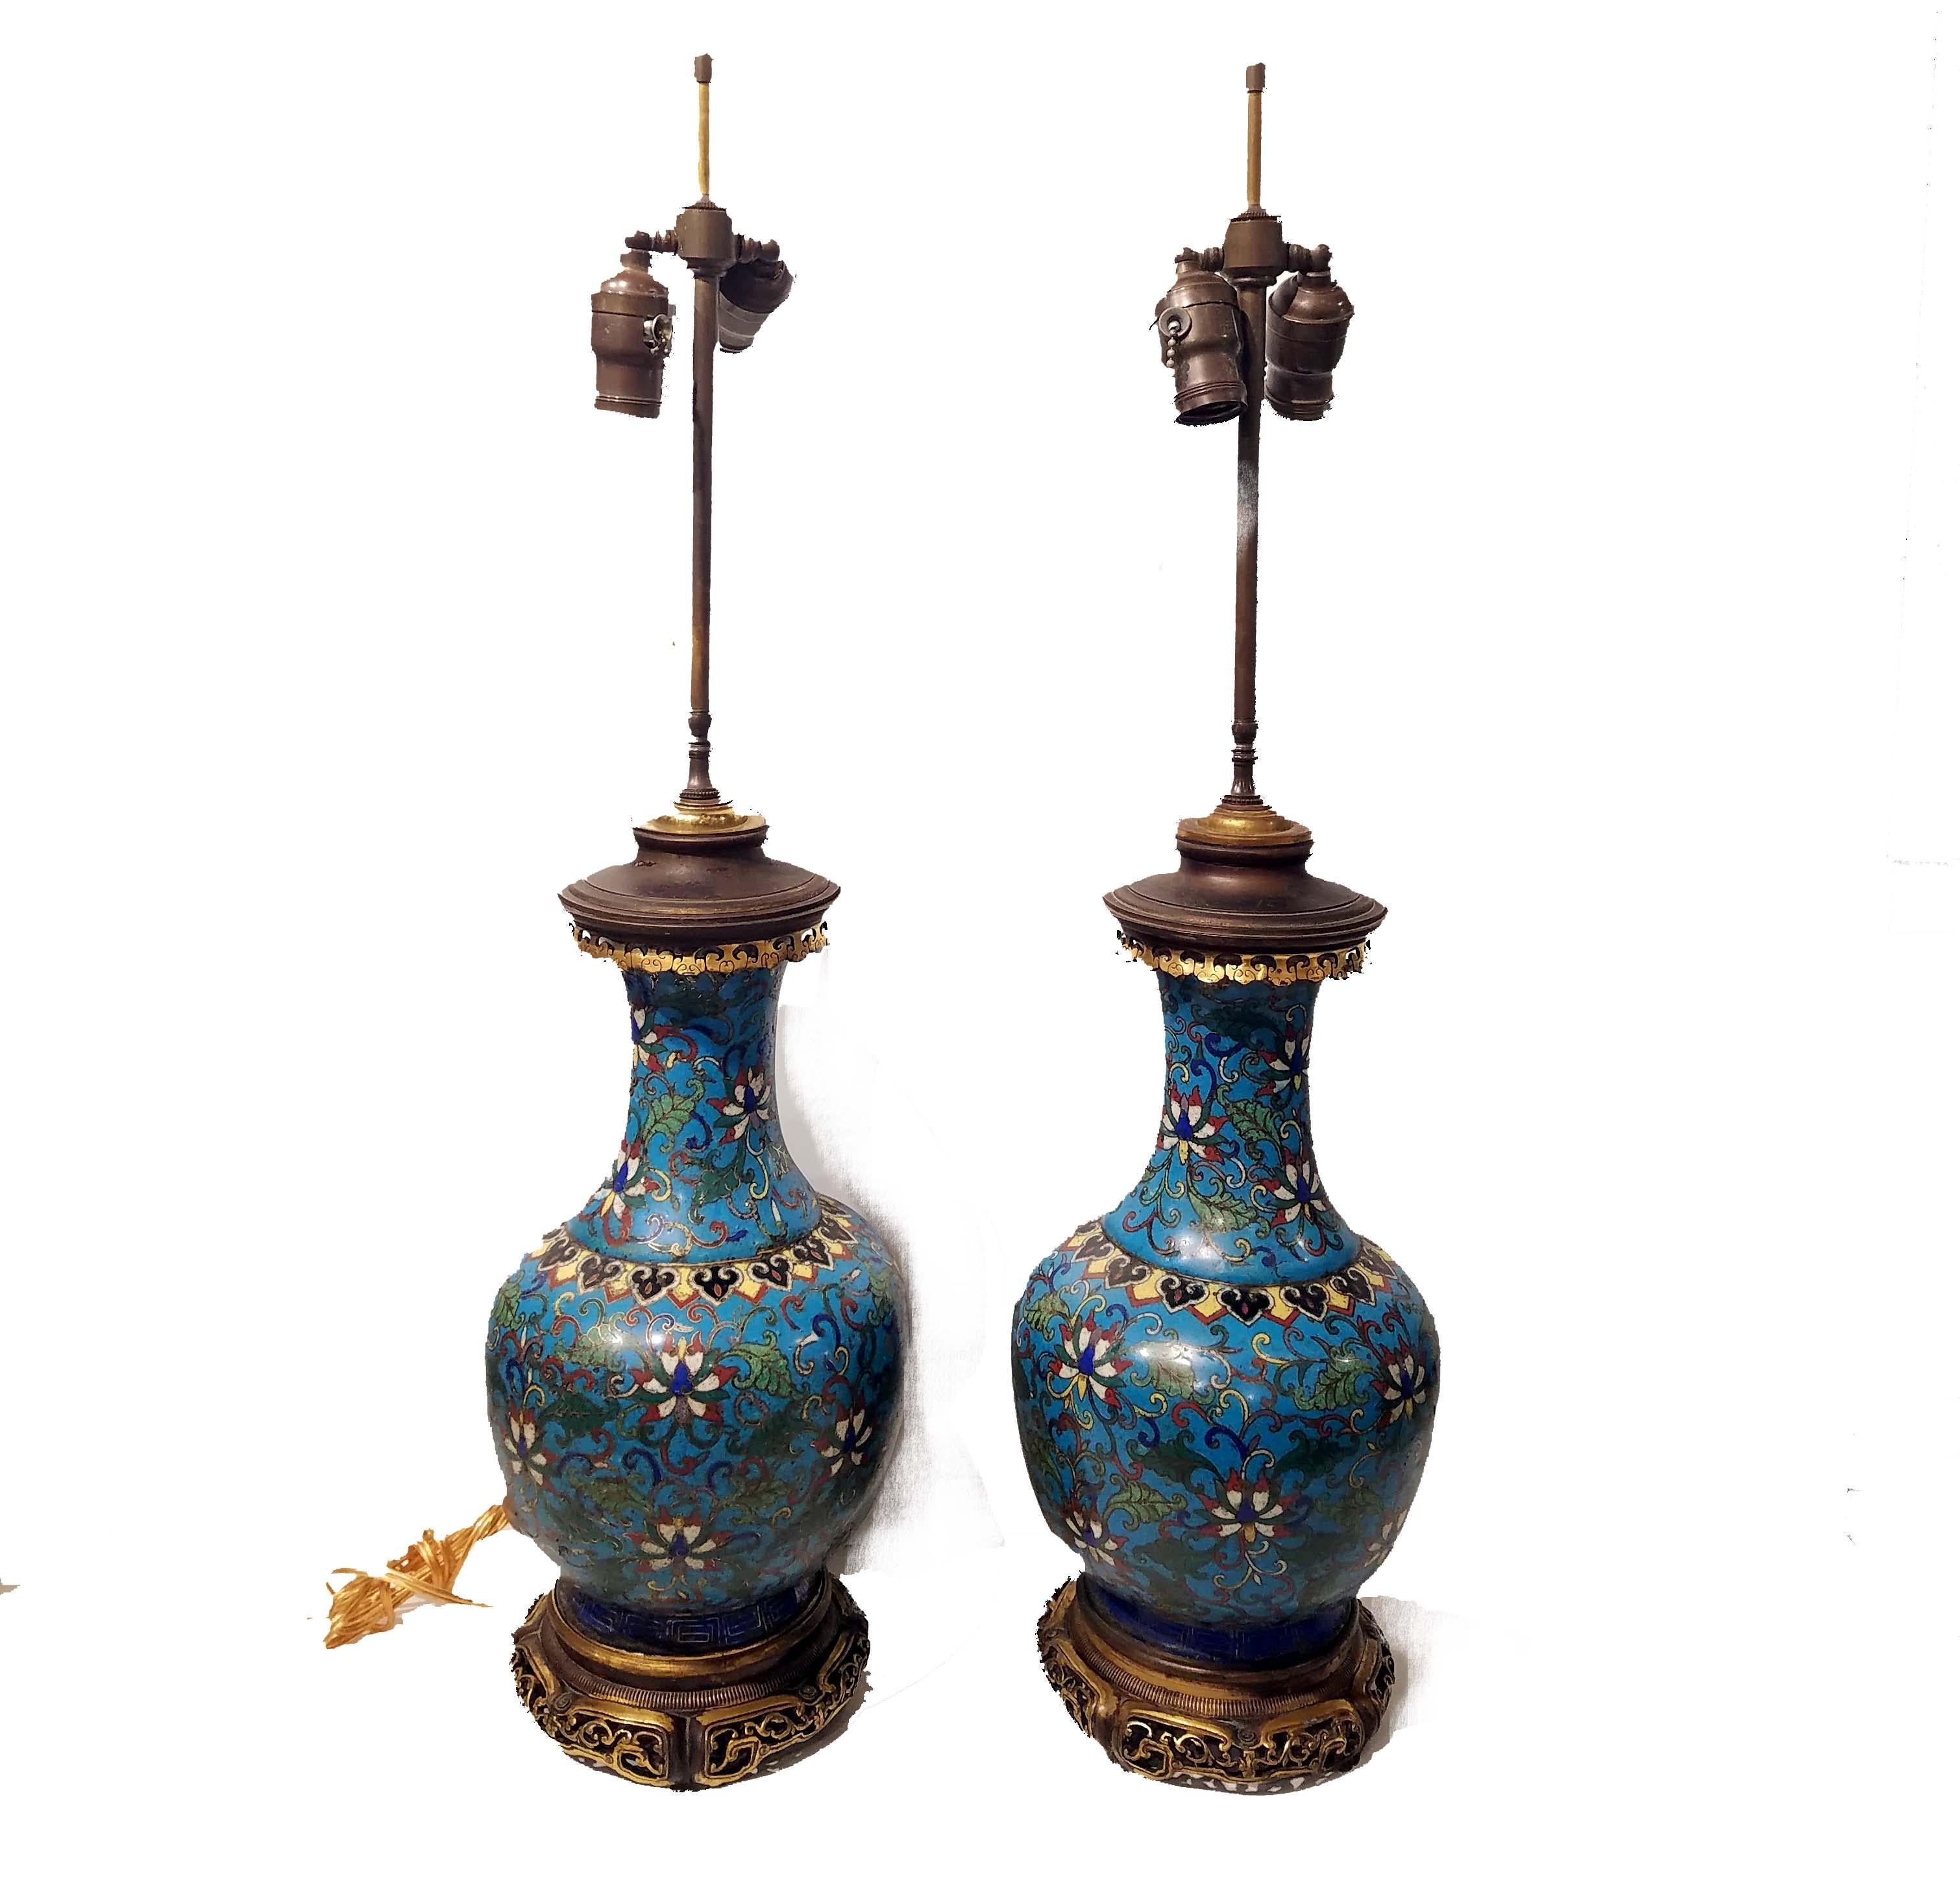 A beautiful pair of Chinese cloisonné vases, circa mid-1700s. Later mounted in French bronze mounts, made into oil lamps and again later electrified.
Ming decoration. The bronze mounts attributed to F. Barbedienne, circa 1880s.
Measures: Over all